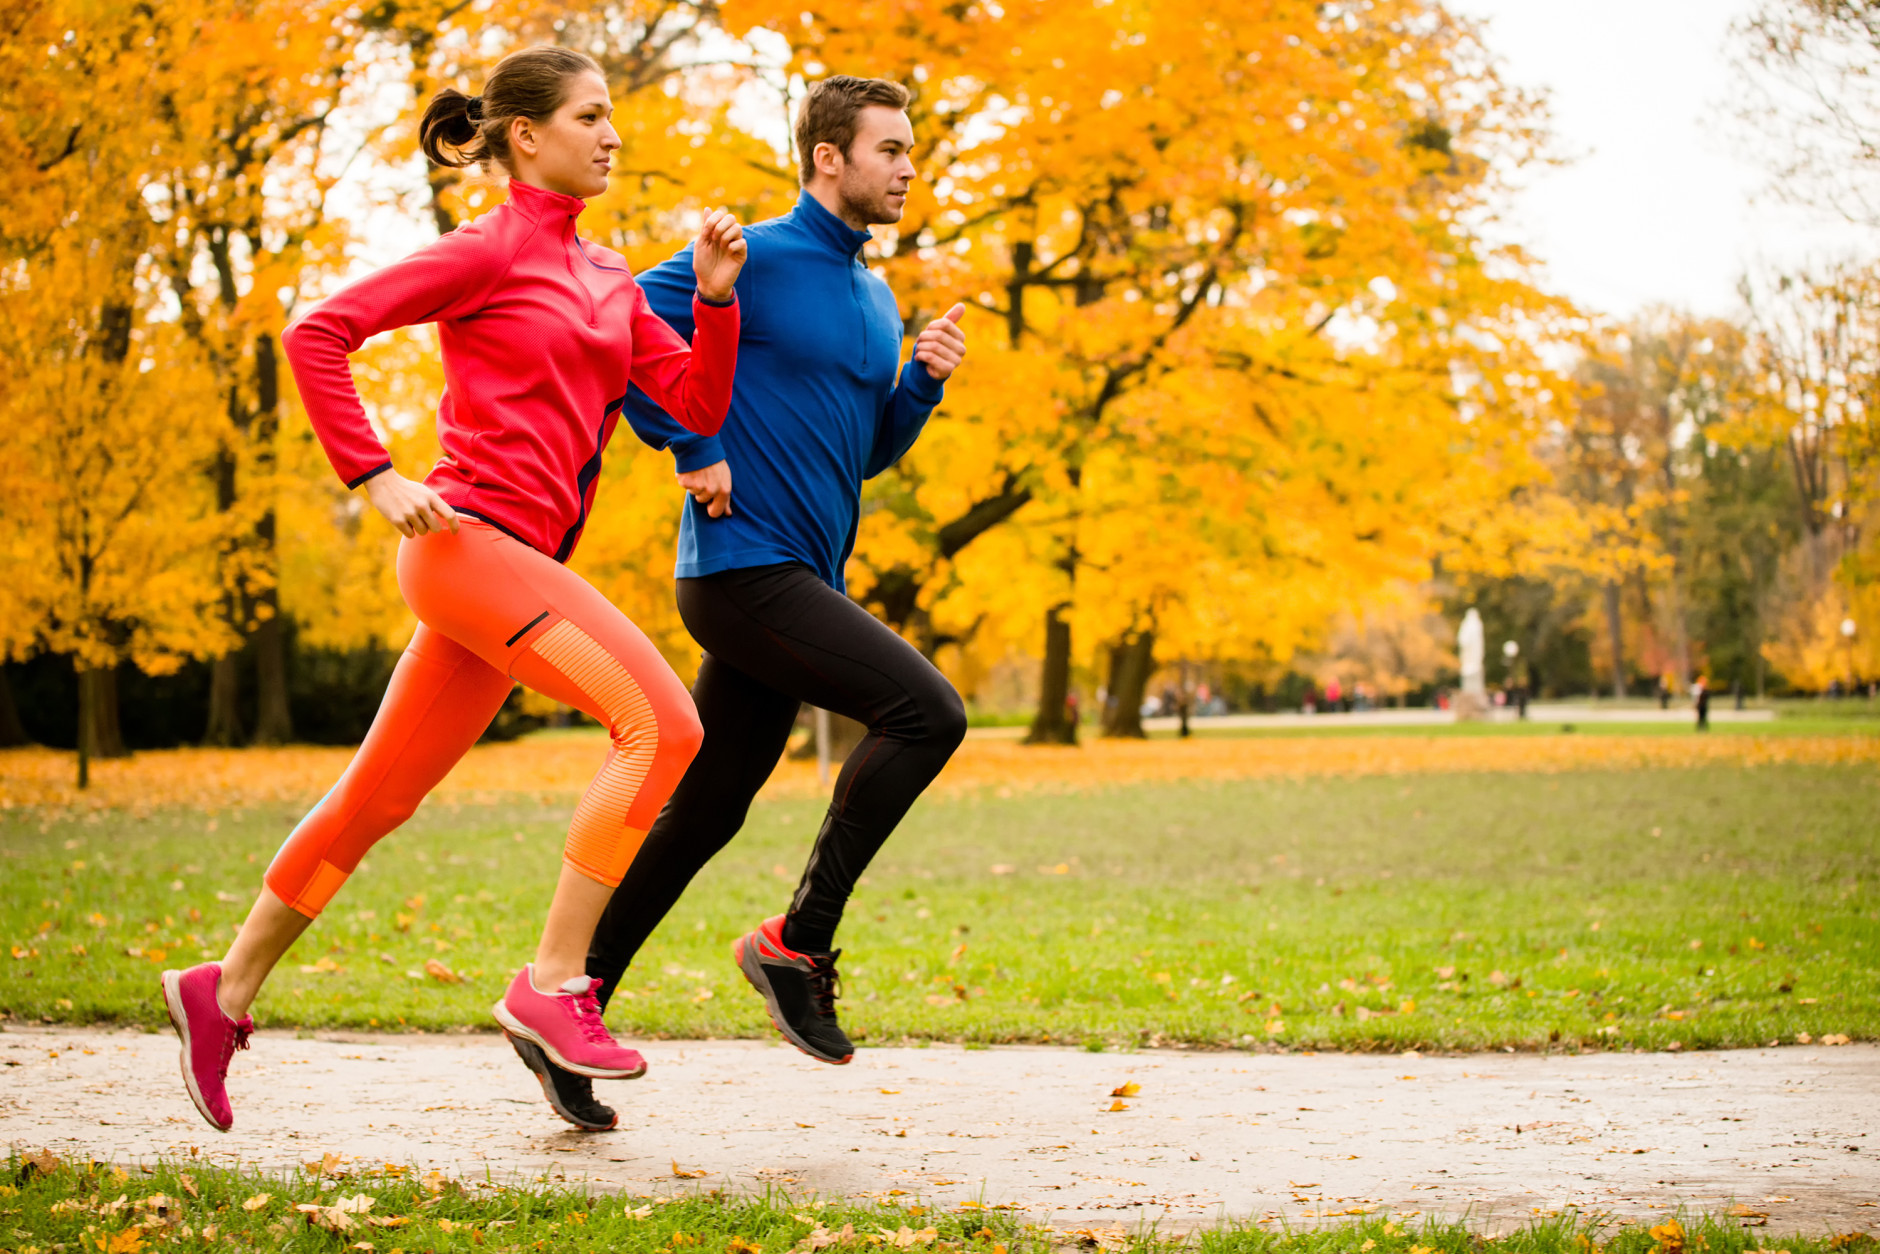 Exercise may be even better for you than previously thought. (Thinkstock)